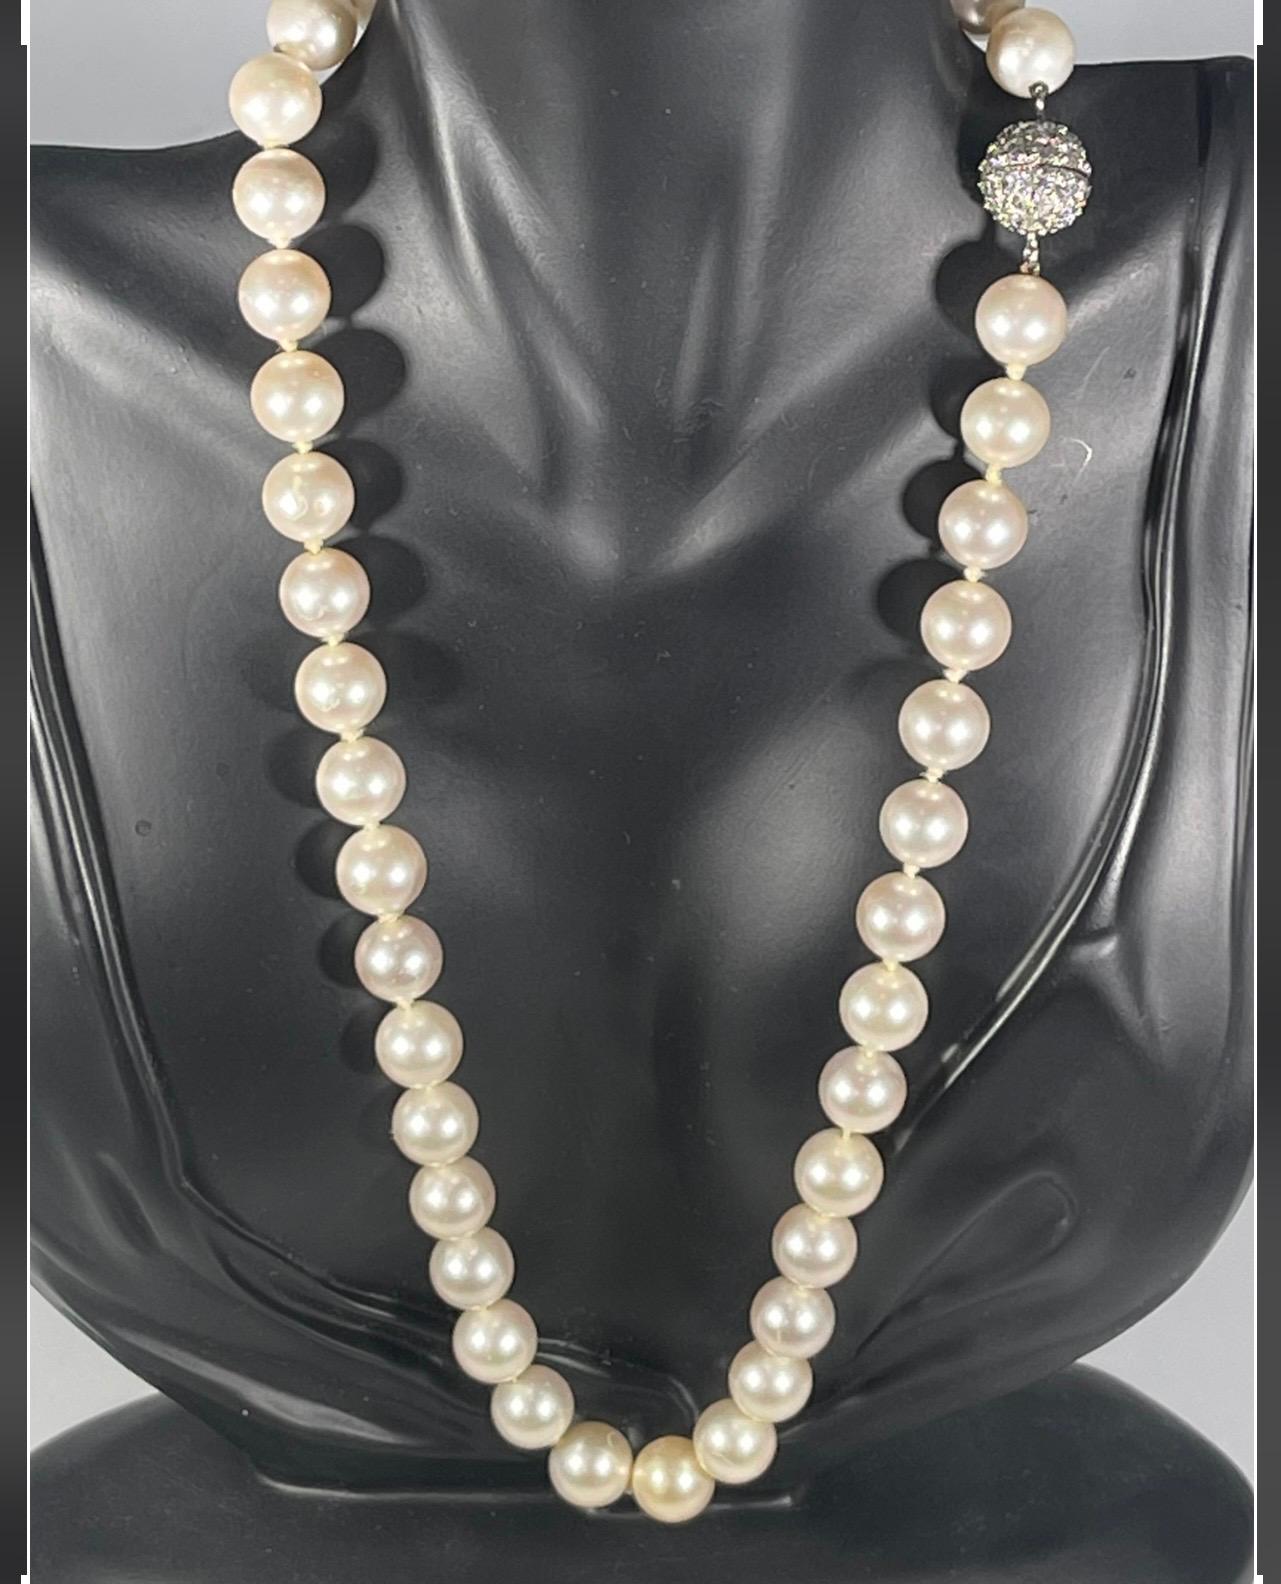 41 Round Akoya Pearls Strand Necklace Set in Metal Ball Clasp For Sale 3